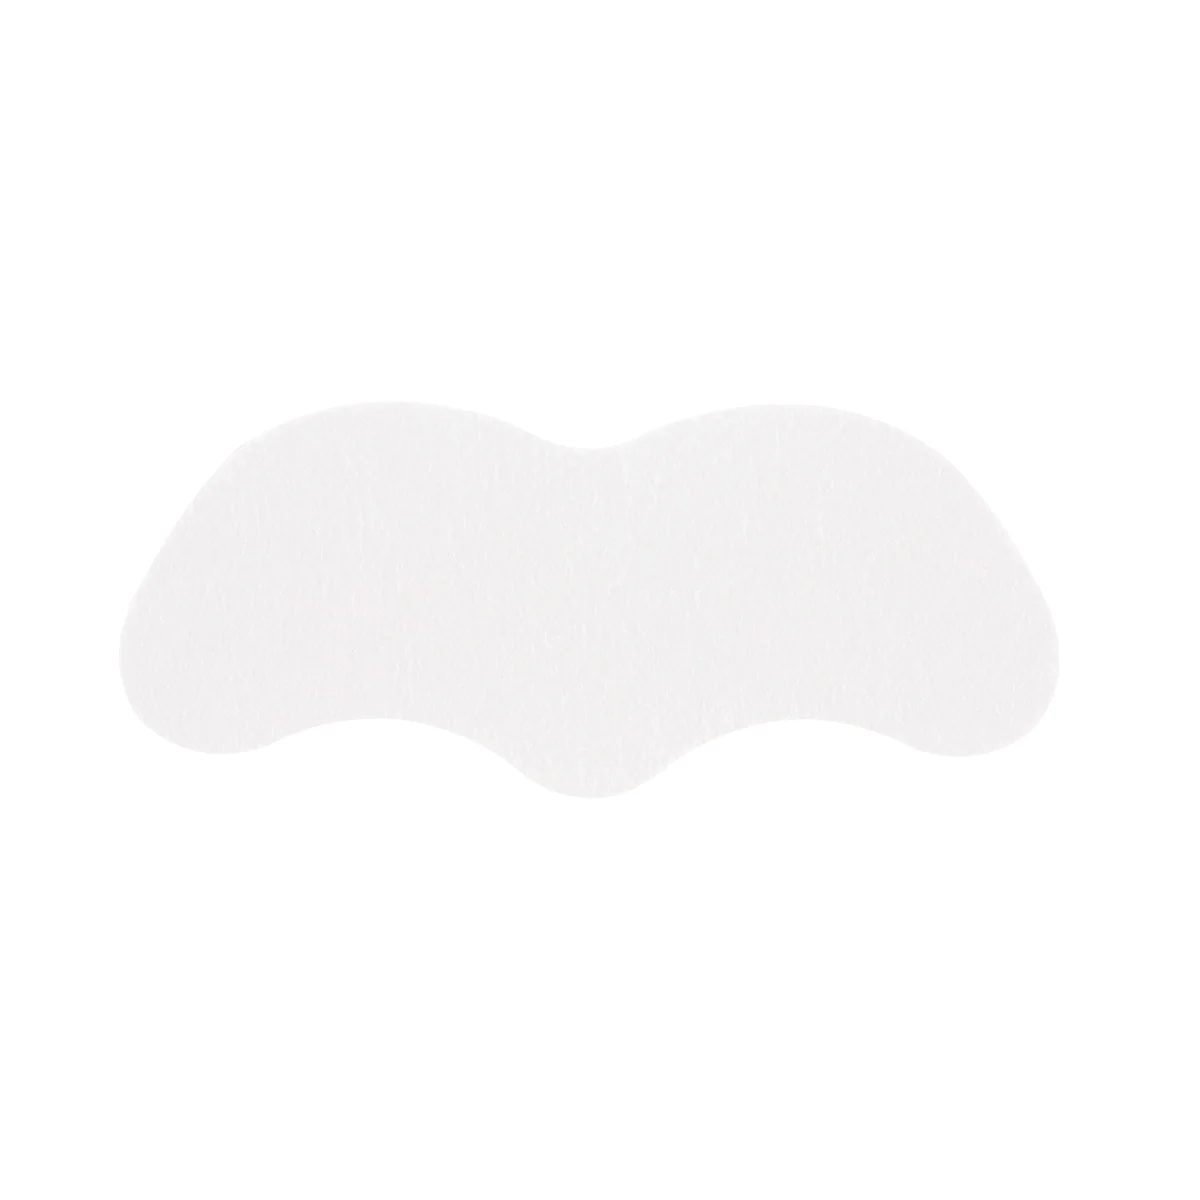 skincare-kbeauty-glowtime-tony moly nose pack package 7 sheets